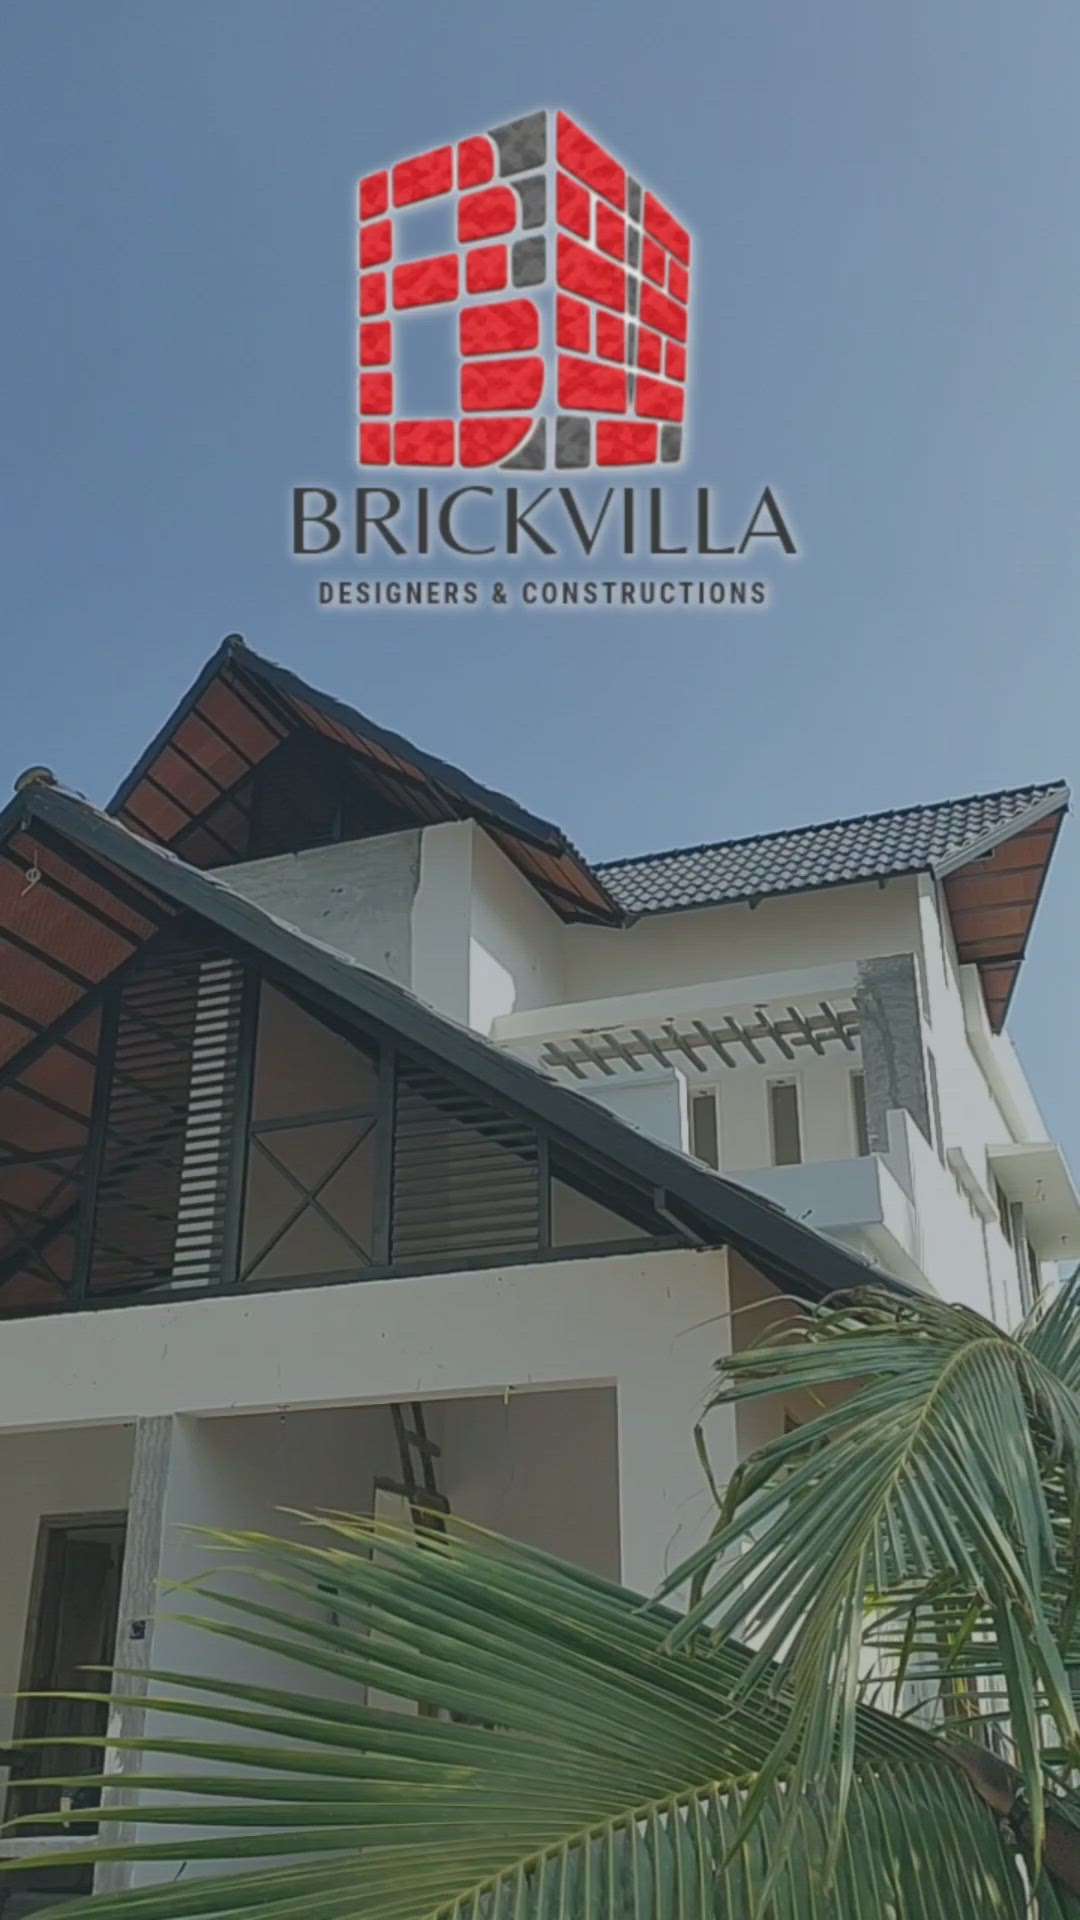 Ceramic roofing&Ceiling tile work
#ceramicrooftile 
#ceilingtiles 
#allkeralaconstruction 
#RoofingDesigns 
#vanithaveeduofficial 
#Allpaintworksolution 
#exterior_Work 
#MixedRoofHouse 
#TraditionalHouse 
#allkeralaconstruction 
#allindiaservice 
#SUPERVISION 
#interiorpainting 
#lowbudget 
#budget_home_simple_interi 
#DRINTERIOR 
#vanithaveedu 
#WallPutty 
#WallPainting 
#GI 
#FABRICATION&WELDING 
#trivandram 
#Kollam